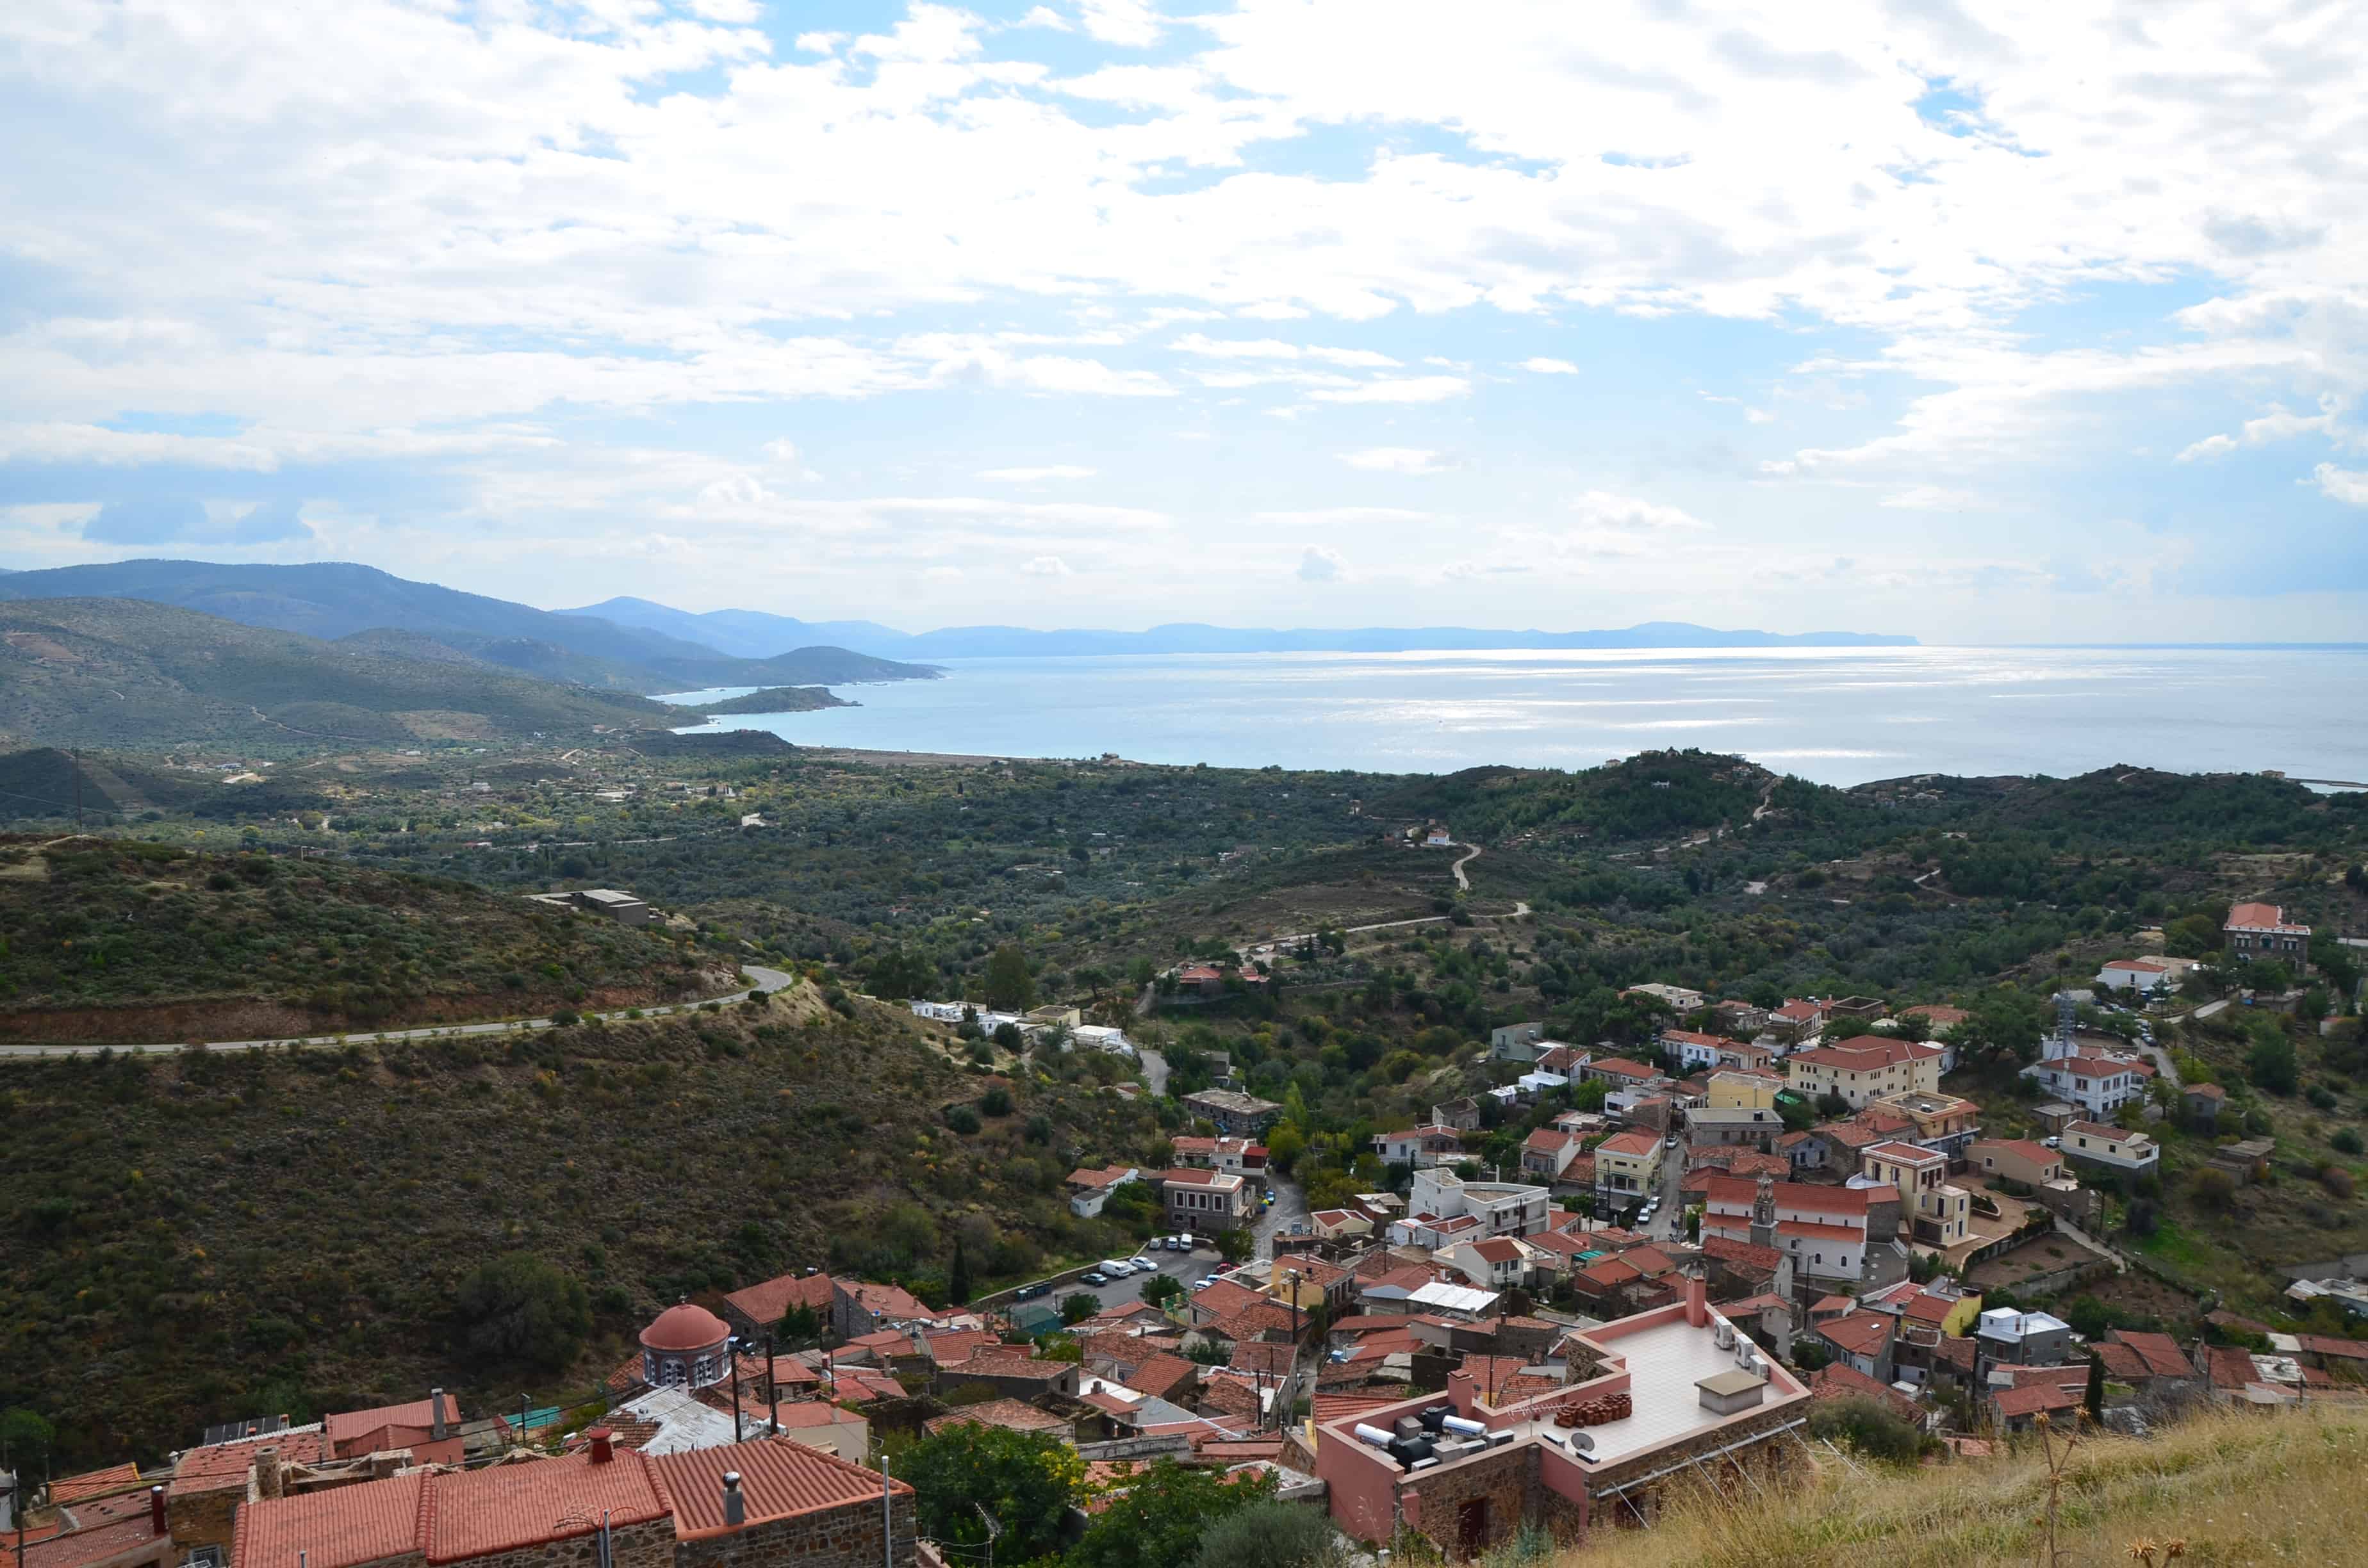 View of town from the castle in Volissos, Chios, Greece